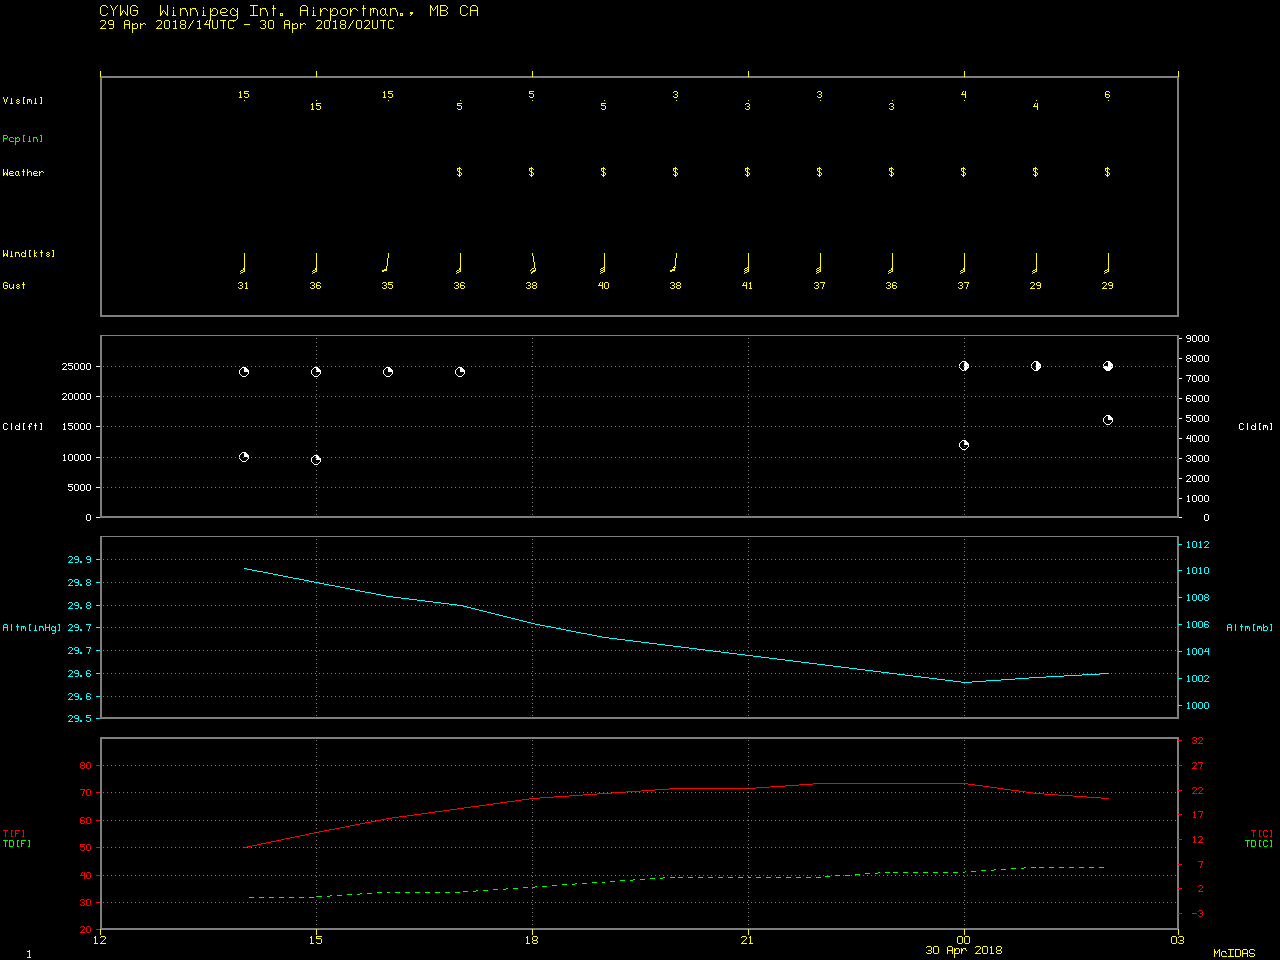 Time series plot of surface weather data at Winnipeg, Manitoba [click to enlarge]